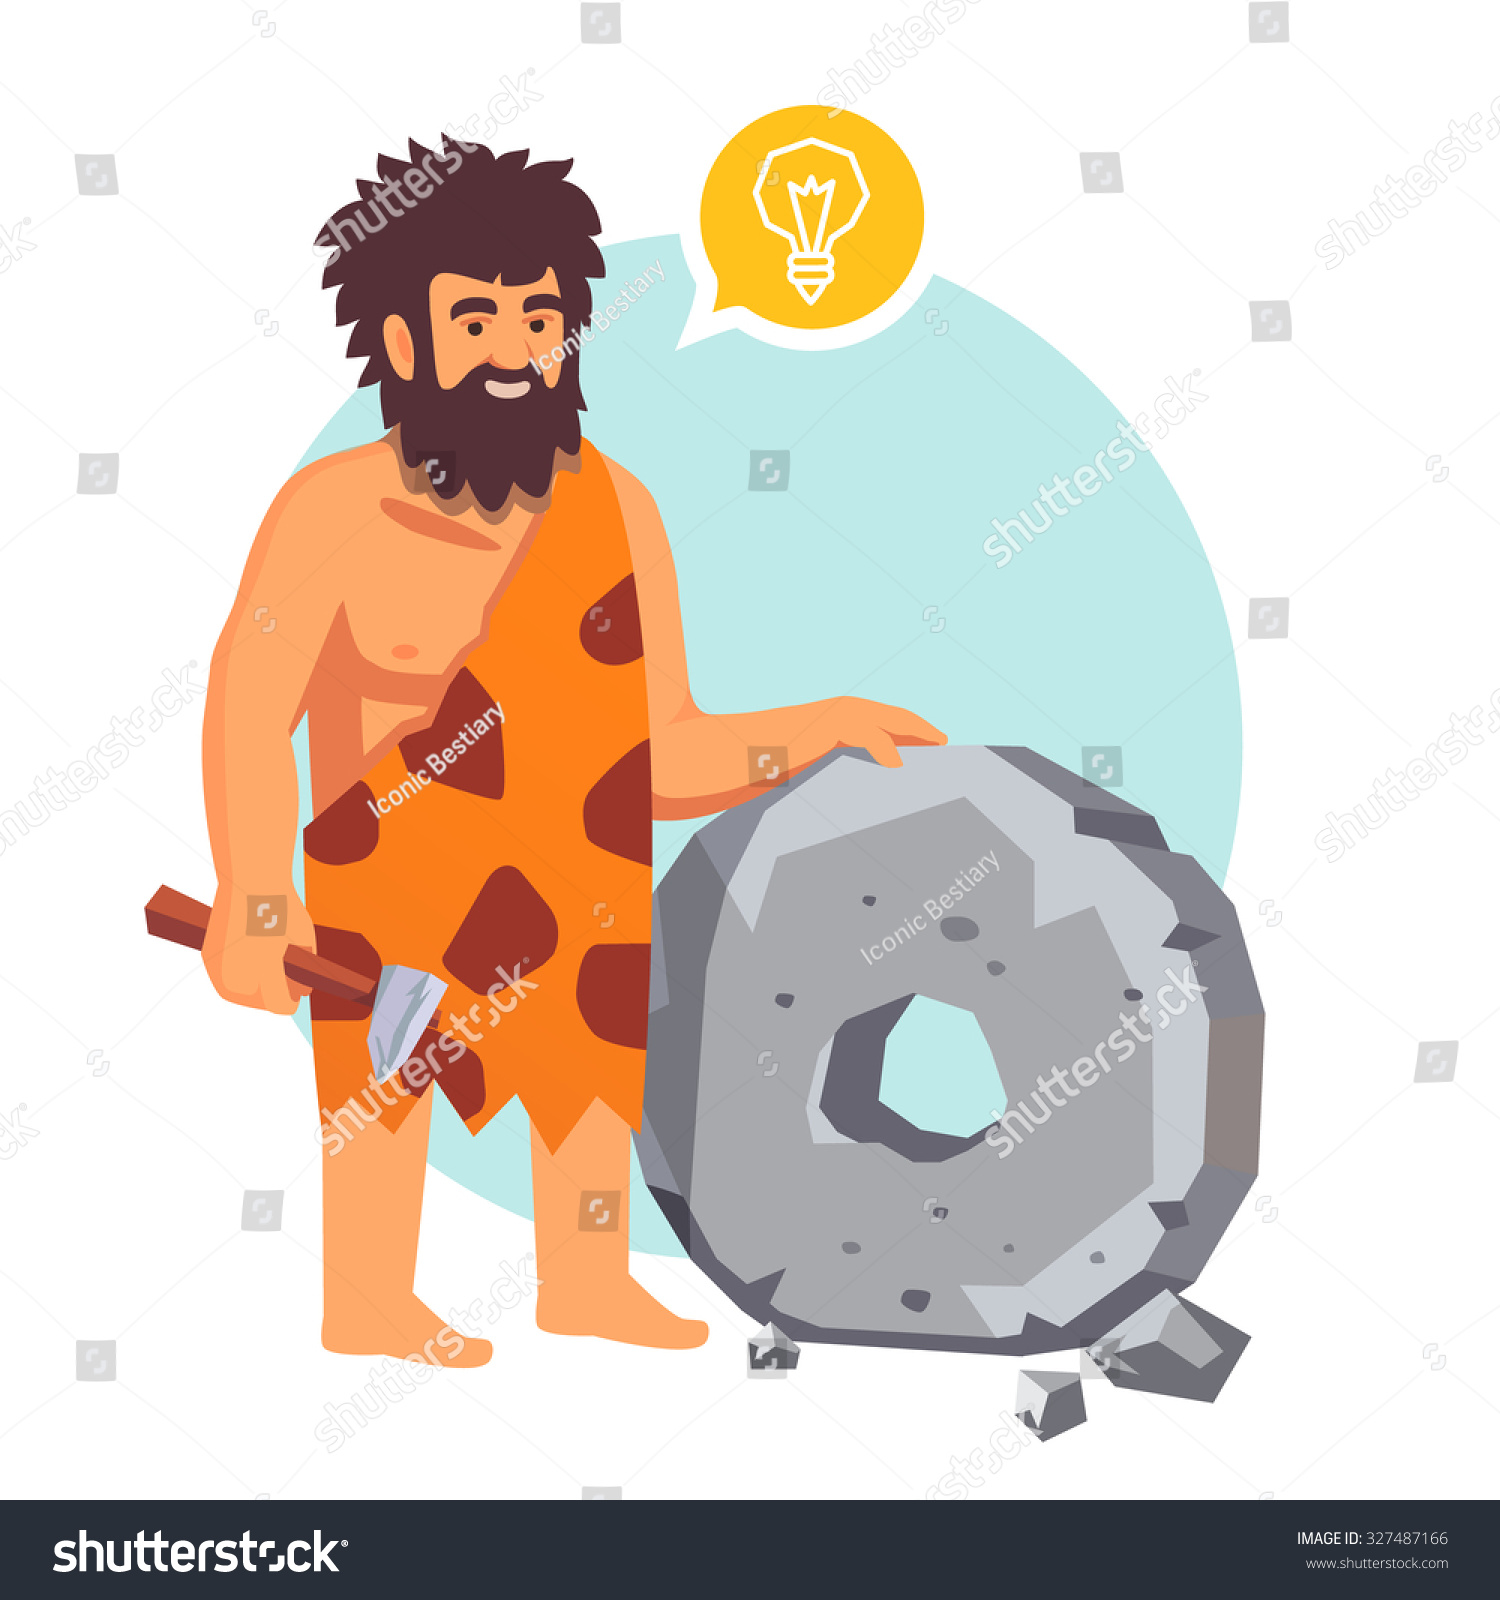 SVG of Stone age primitive man had an idea and invents a wheel. Flat style vector illustration isolated on white background. svg